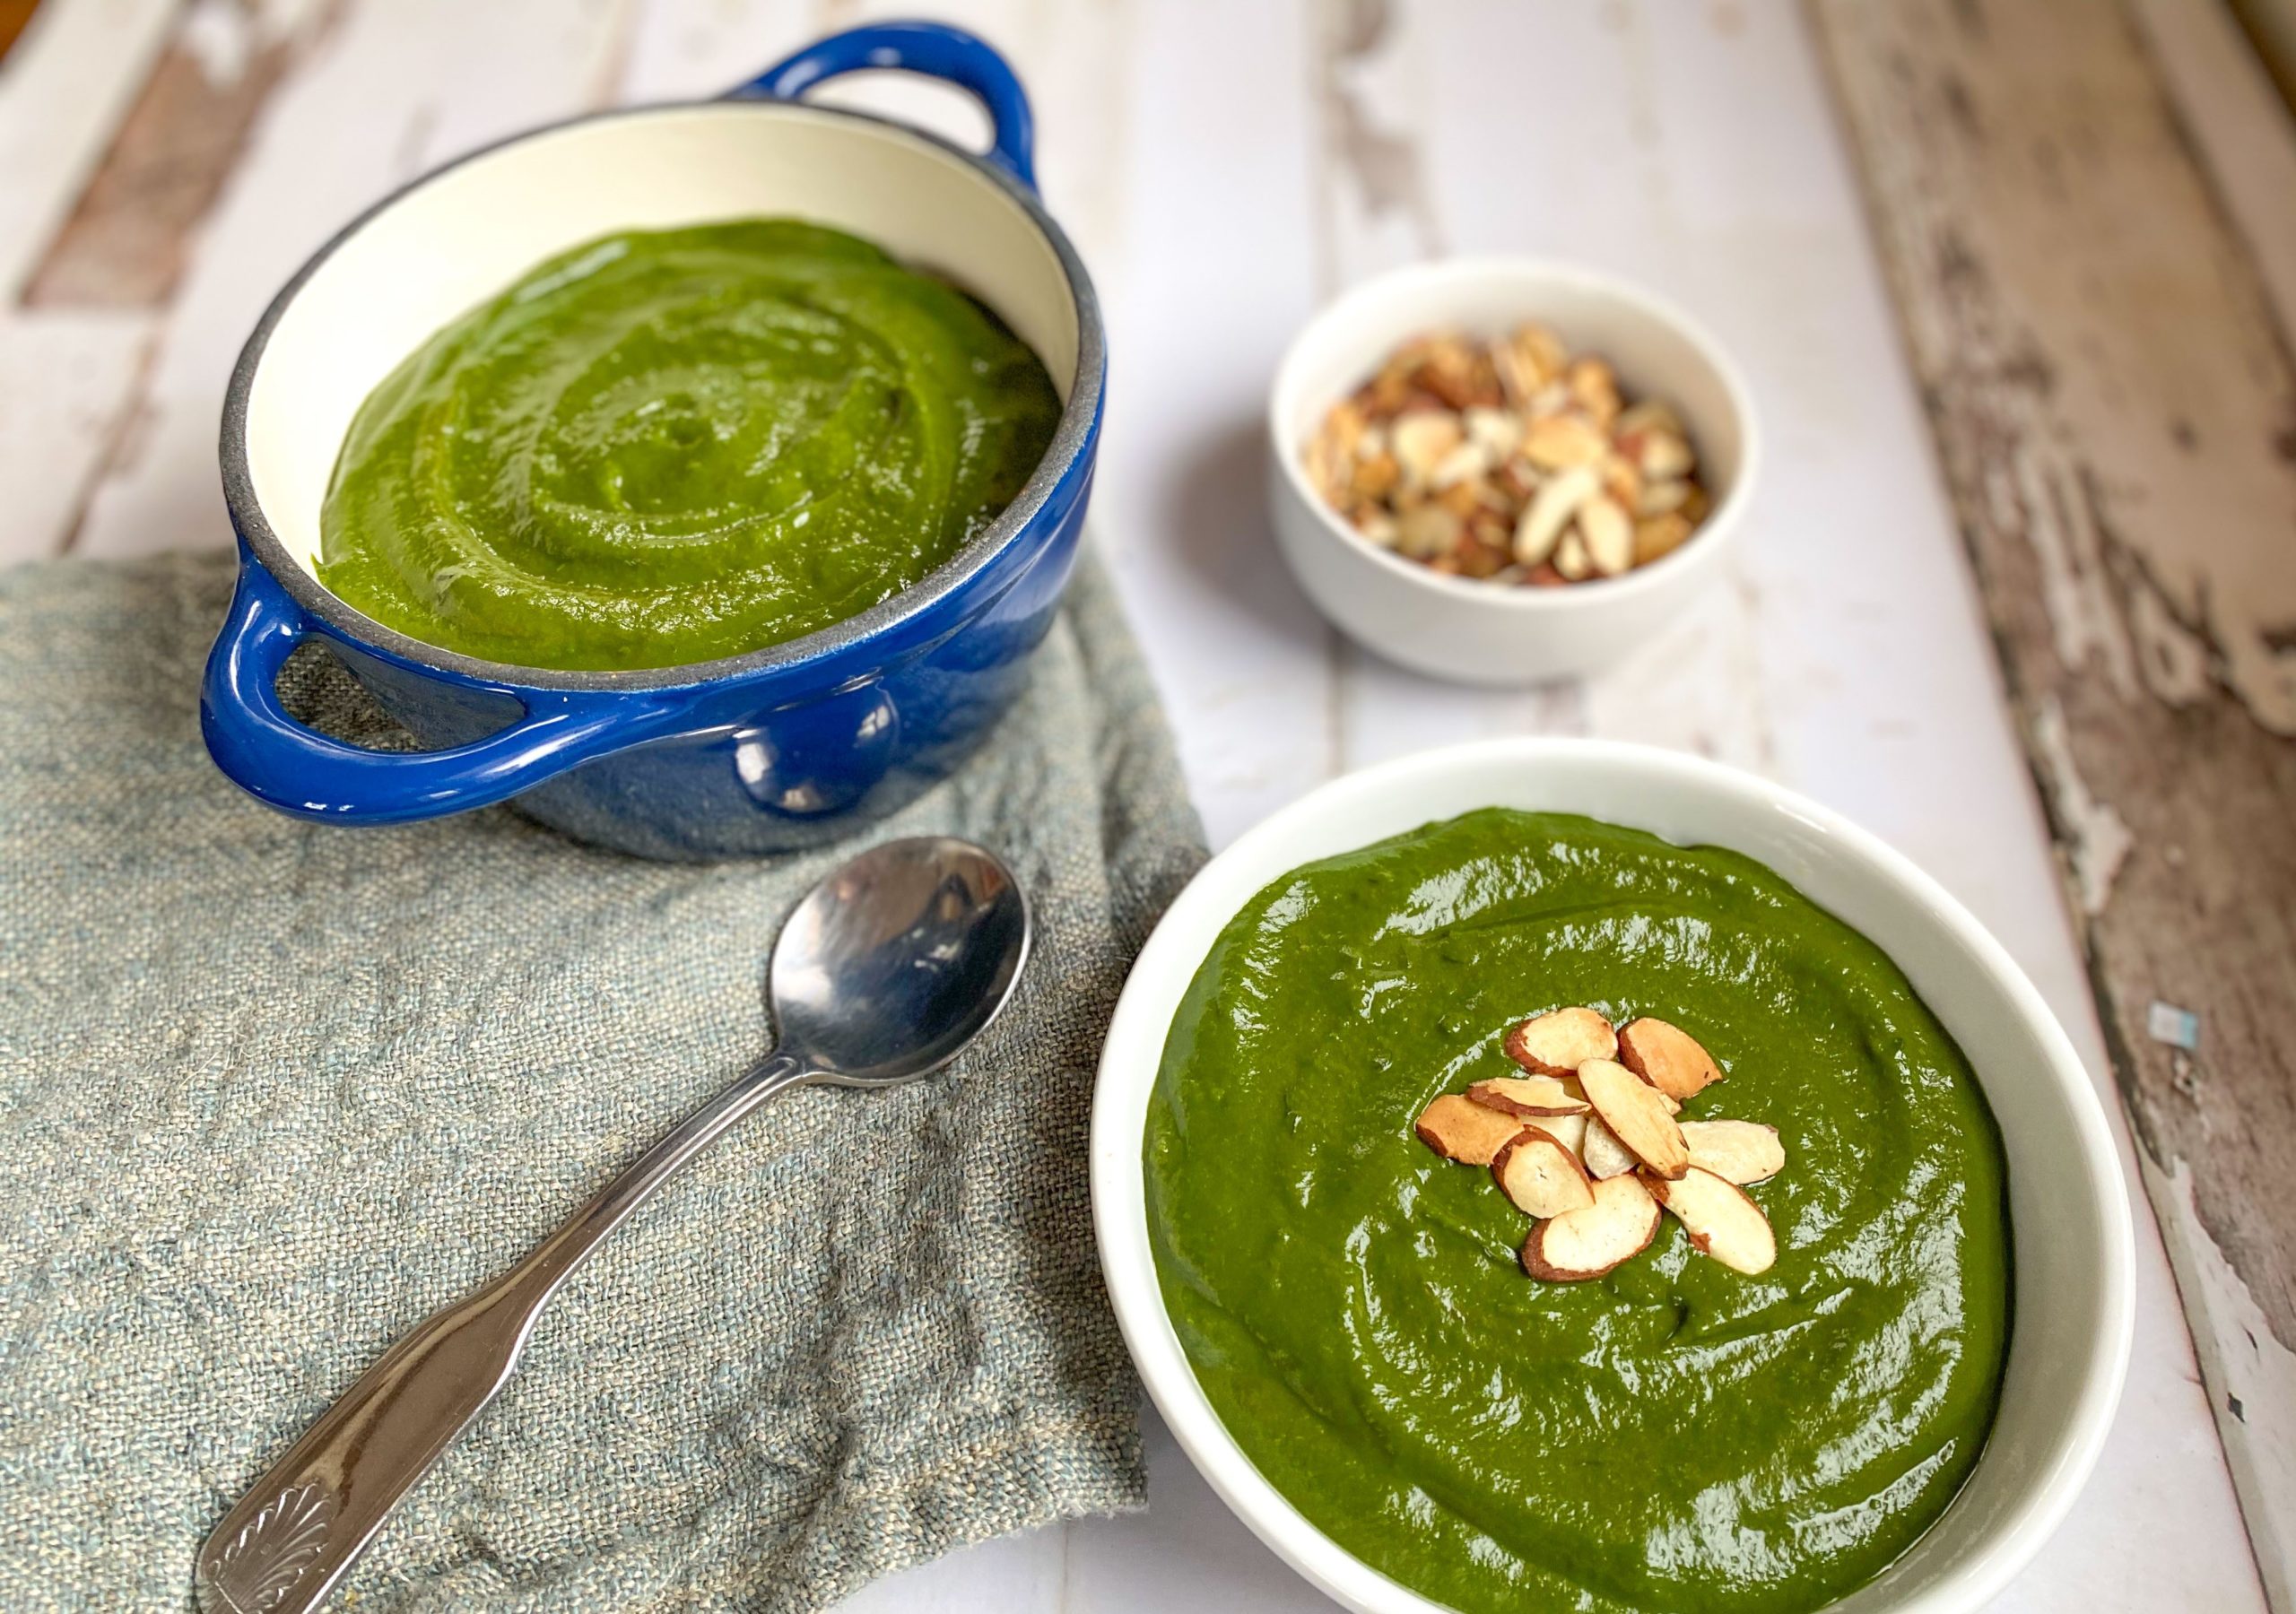 Big Greens Soup with Toasted Almonds